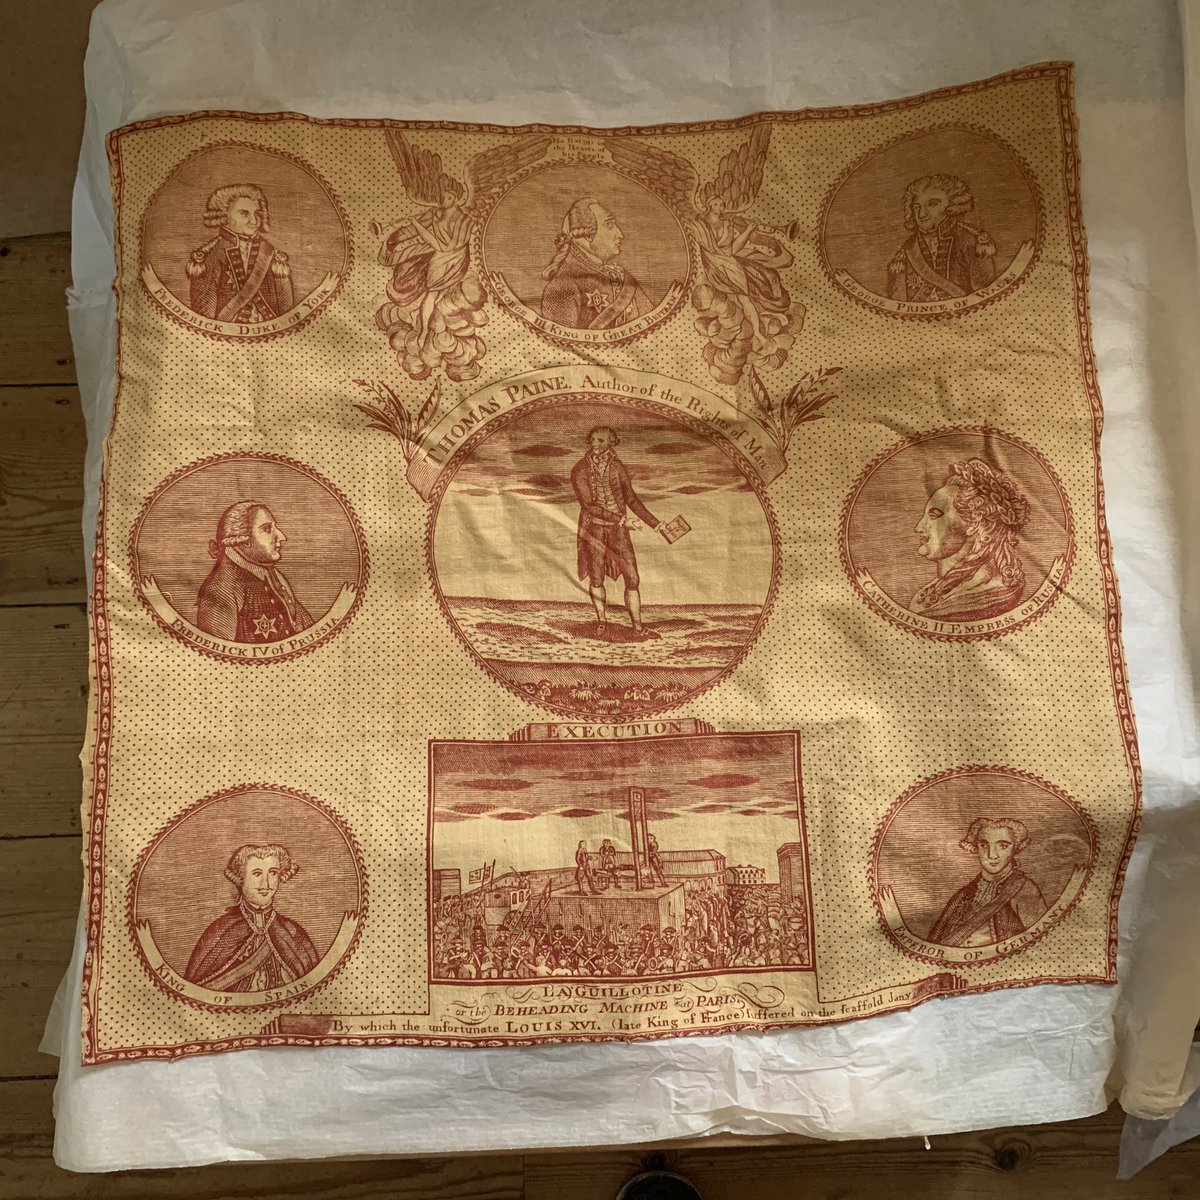 Also in the attic of Anne of Cleves’ House: a piece of cloth featuring Tom Paine, a guillotine & the crowned heads of Europe; some muskets in a box; a Victorian pub sign; & a painting of the Lewes avalanche, which in 1837 buried 15 people, of whom only 6 survived.  #SussexTour